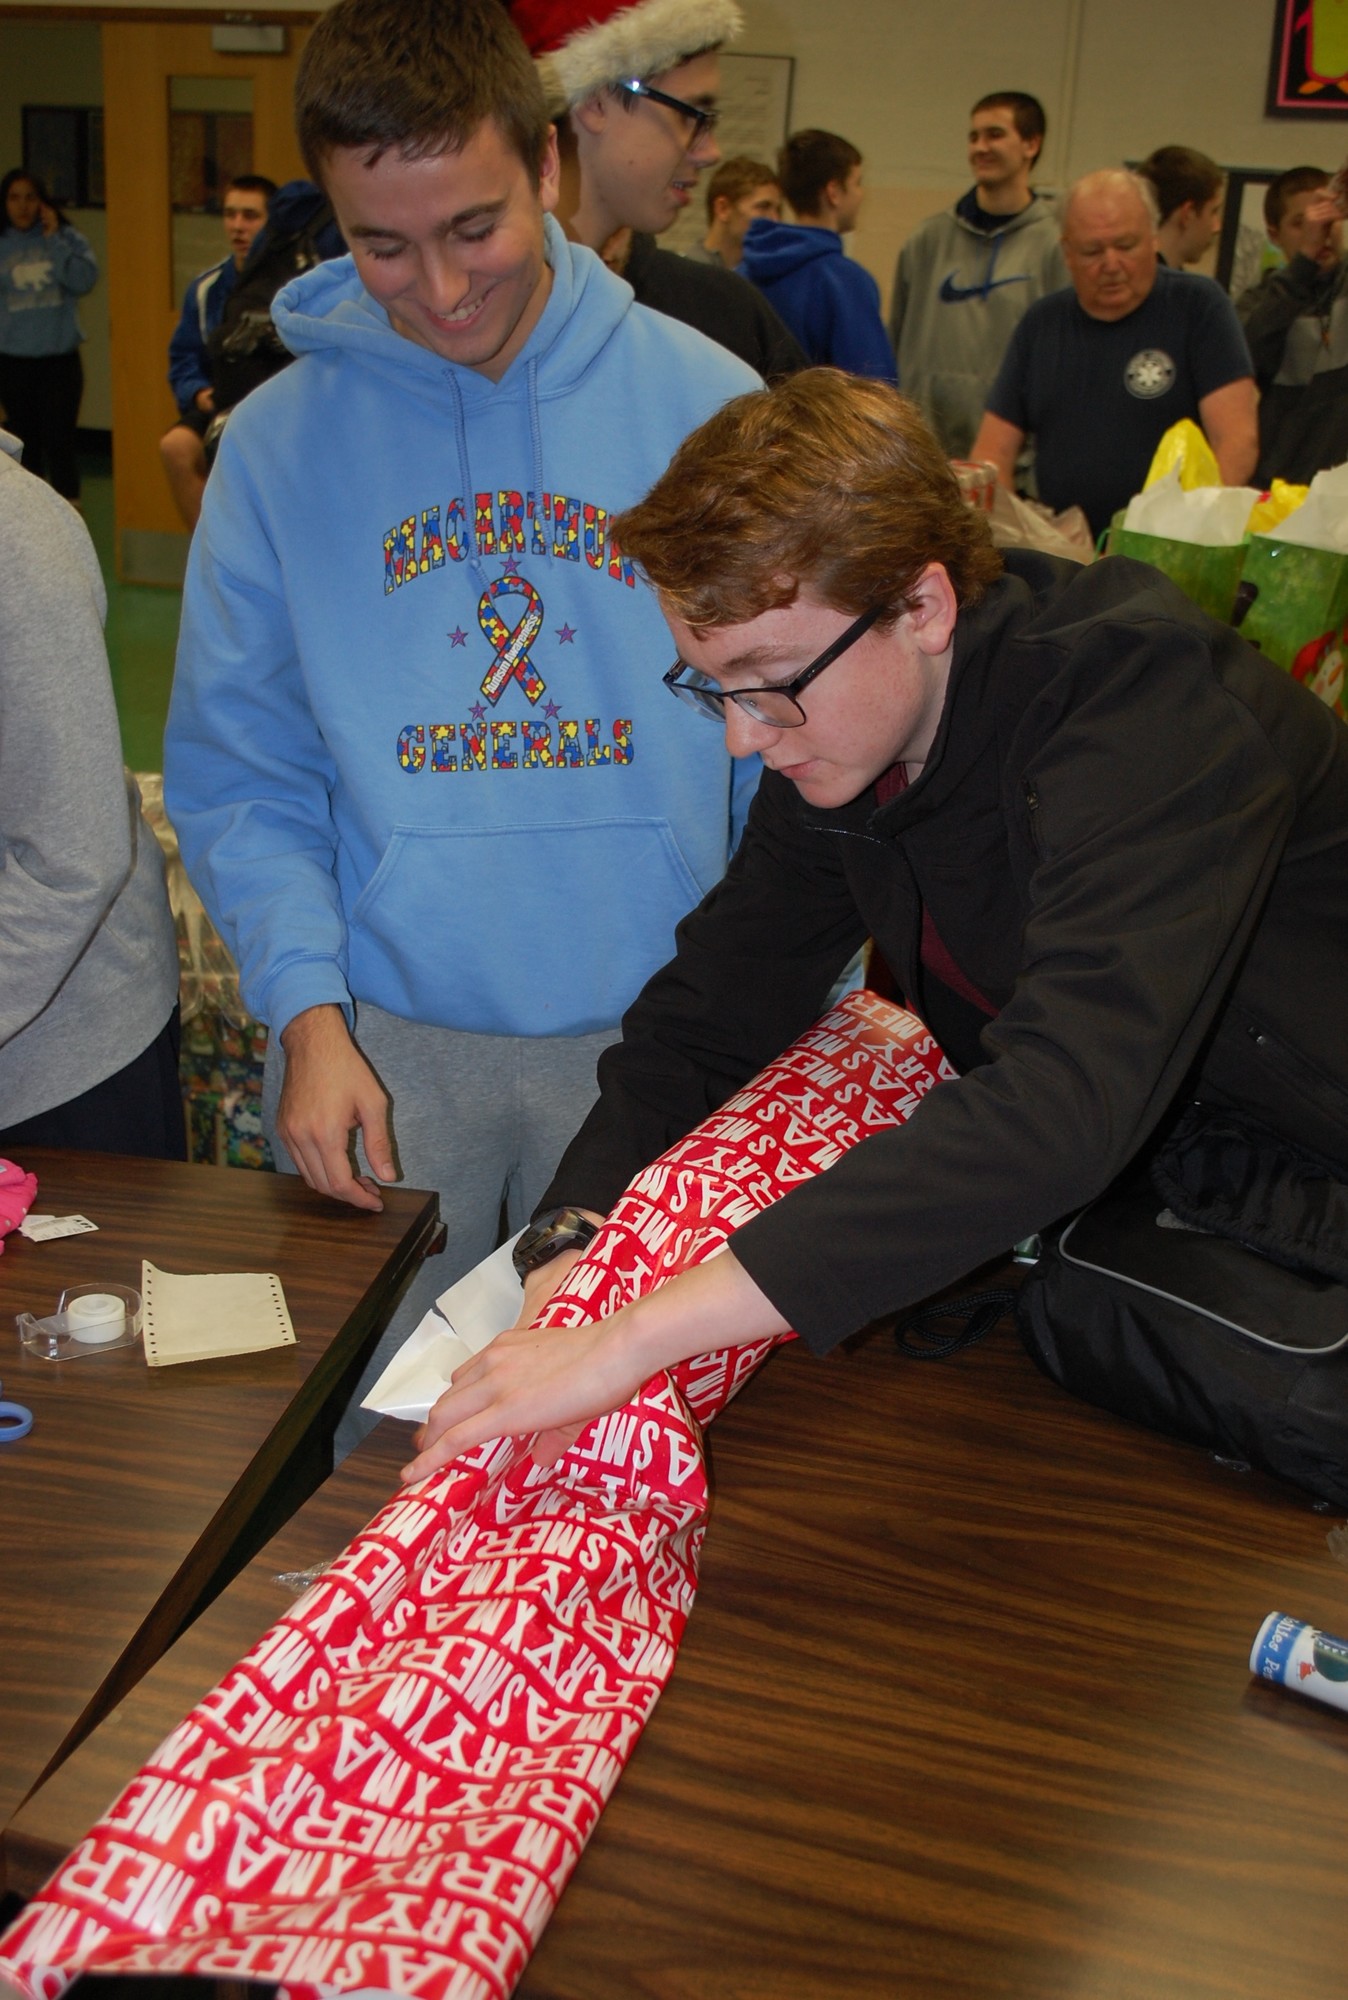 Peter D’Angelo and Greg Matousek, of MacArthur's National Honor Society, helped to wrap the presents.